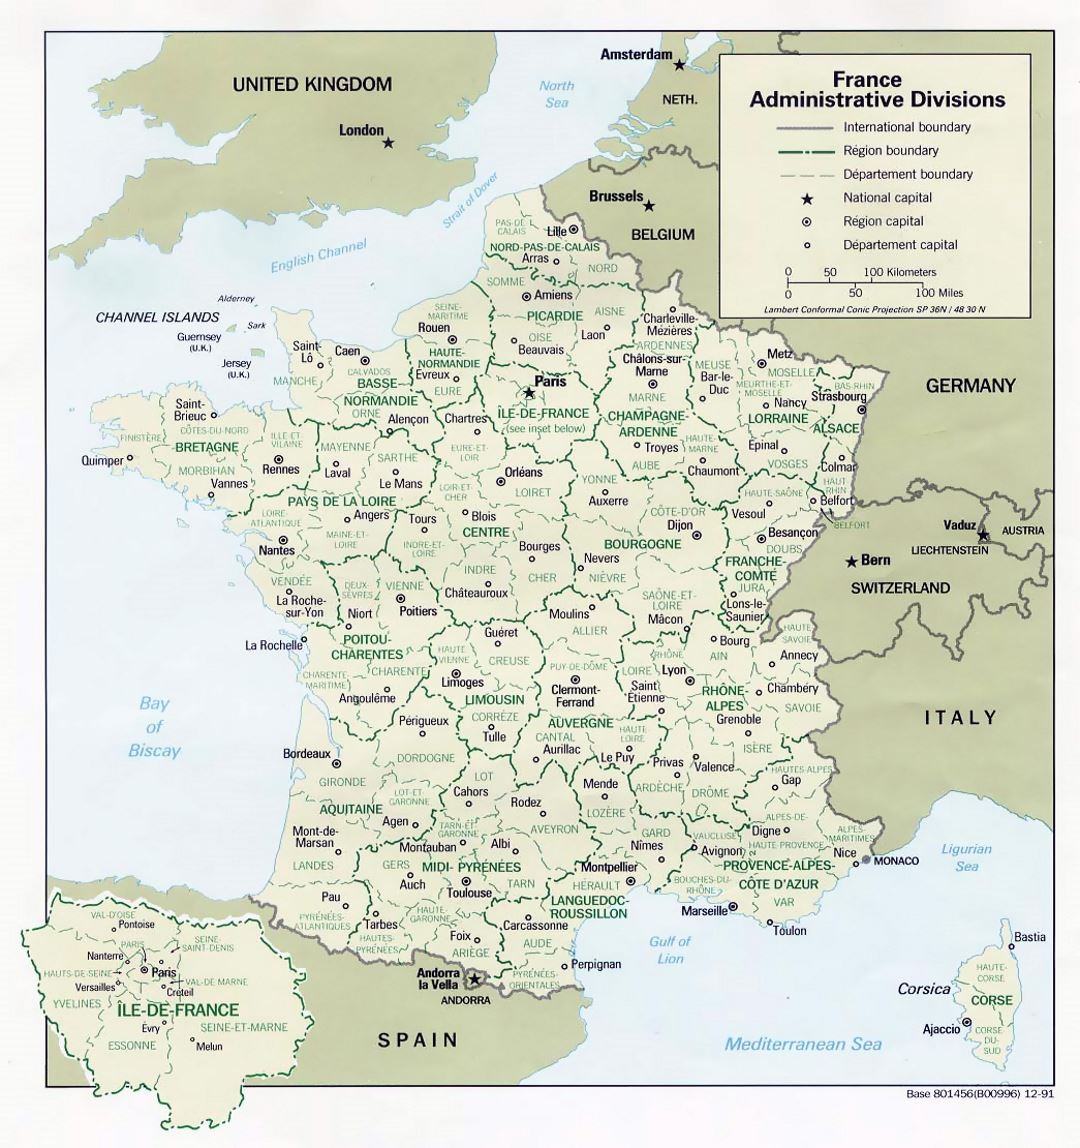 Large administrative divisions map of France - 1991